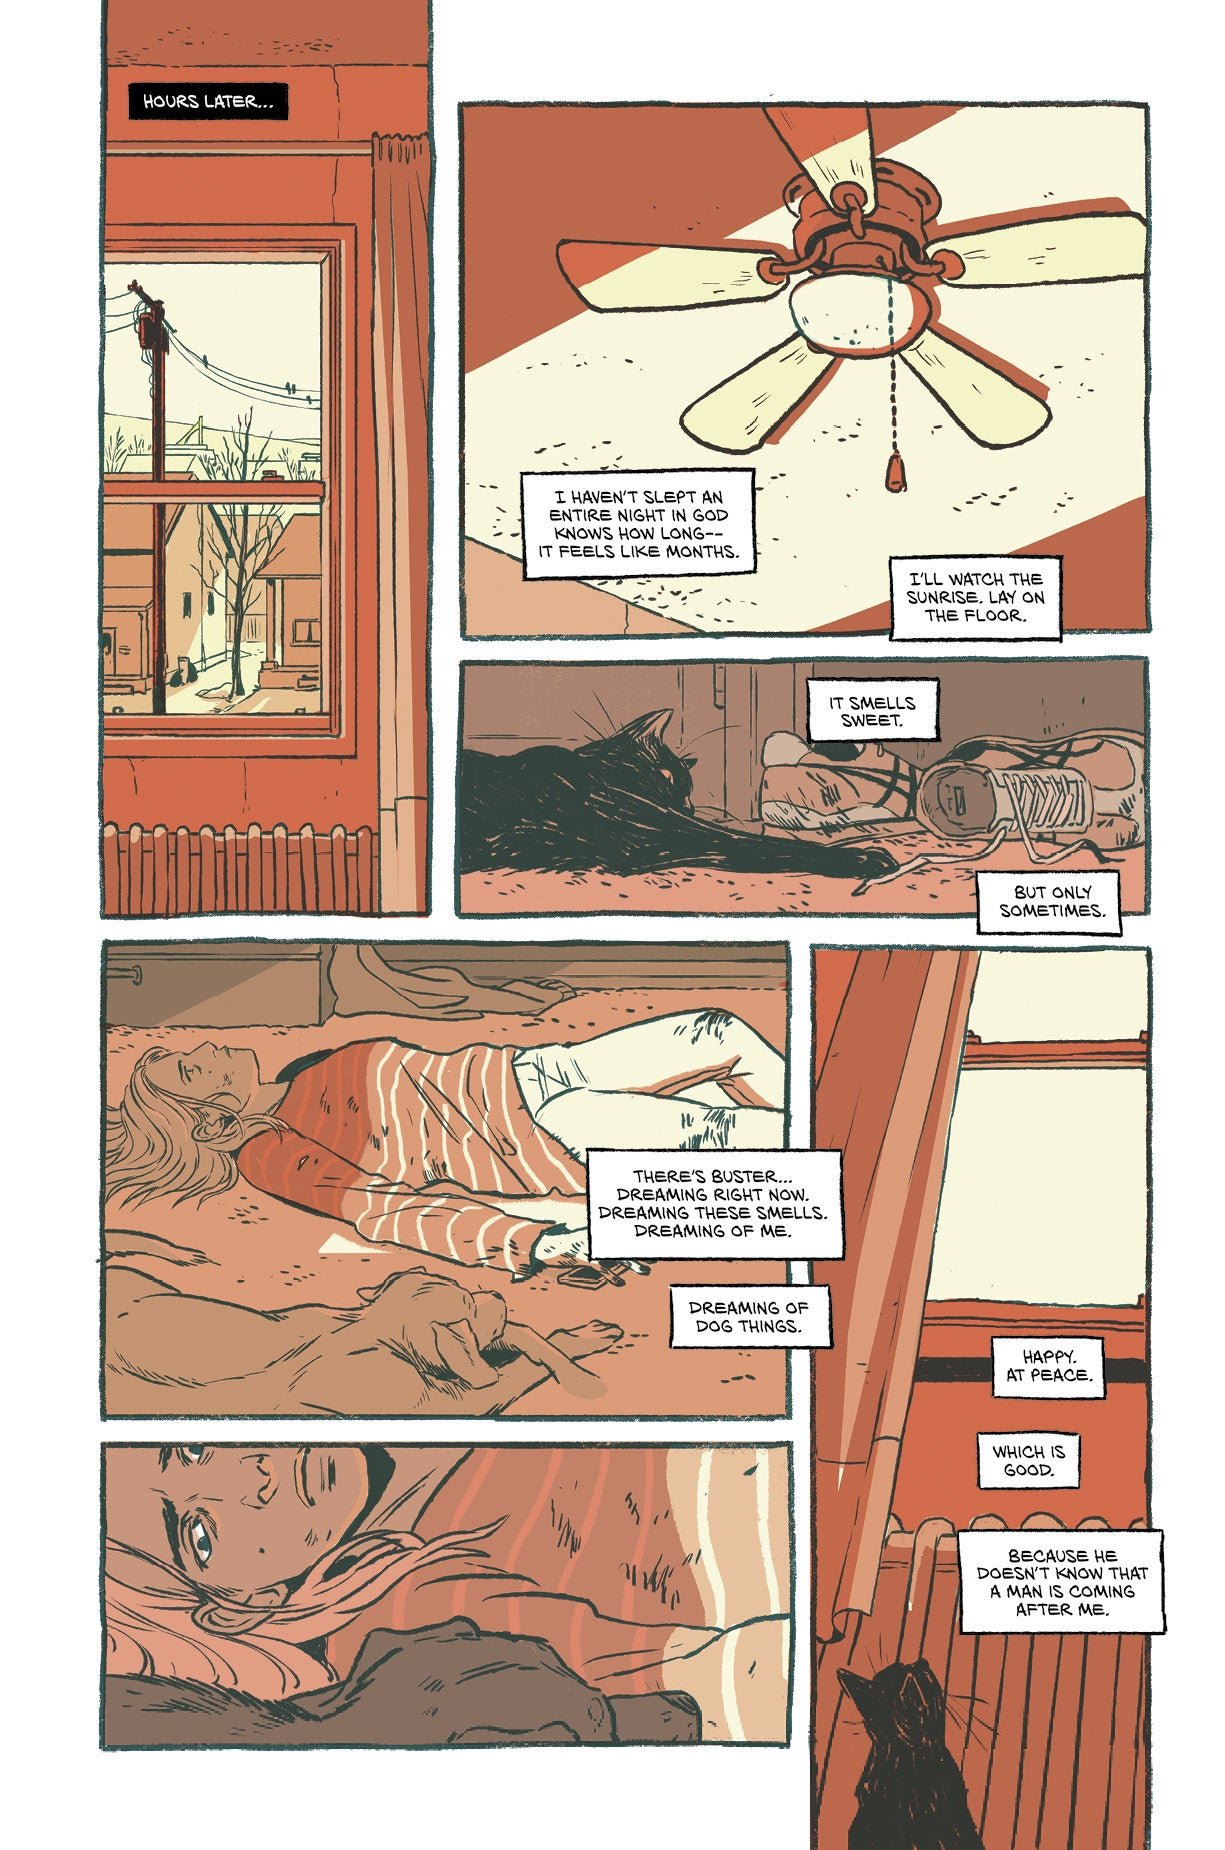 Interior comics pages from Loving, Ohio